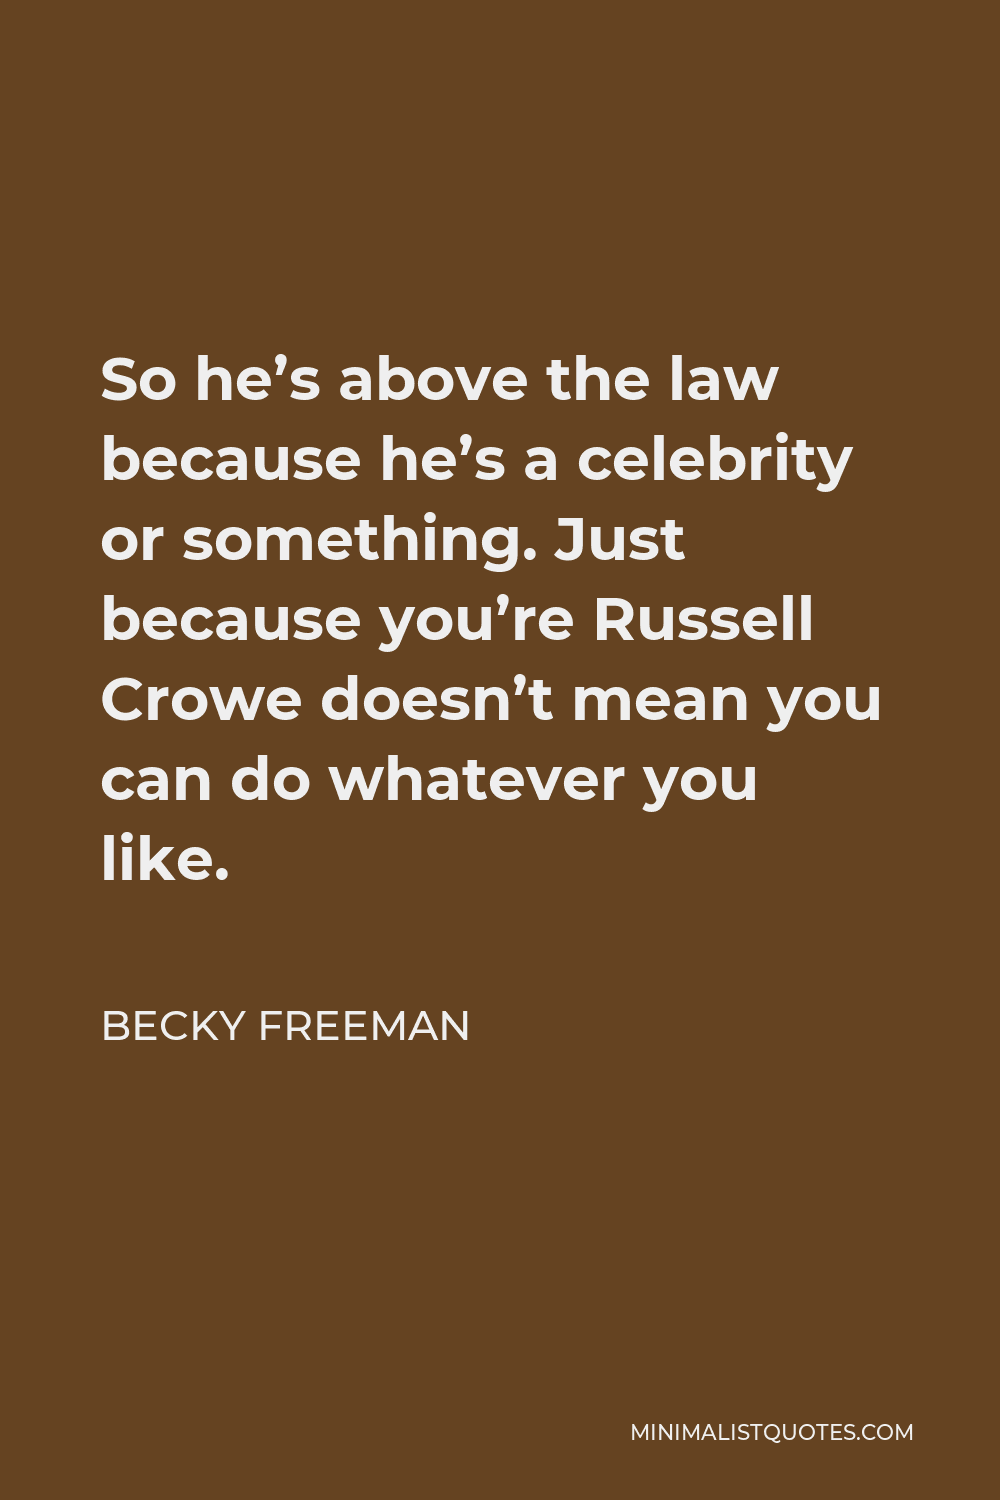 Becky Freeman Quote - So he’s above the law because he’s a celebrity or something. Just because you’re Russell Crowe doesn’t mean you can do whatever you like.